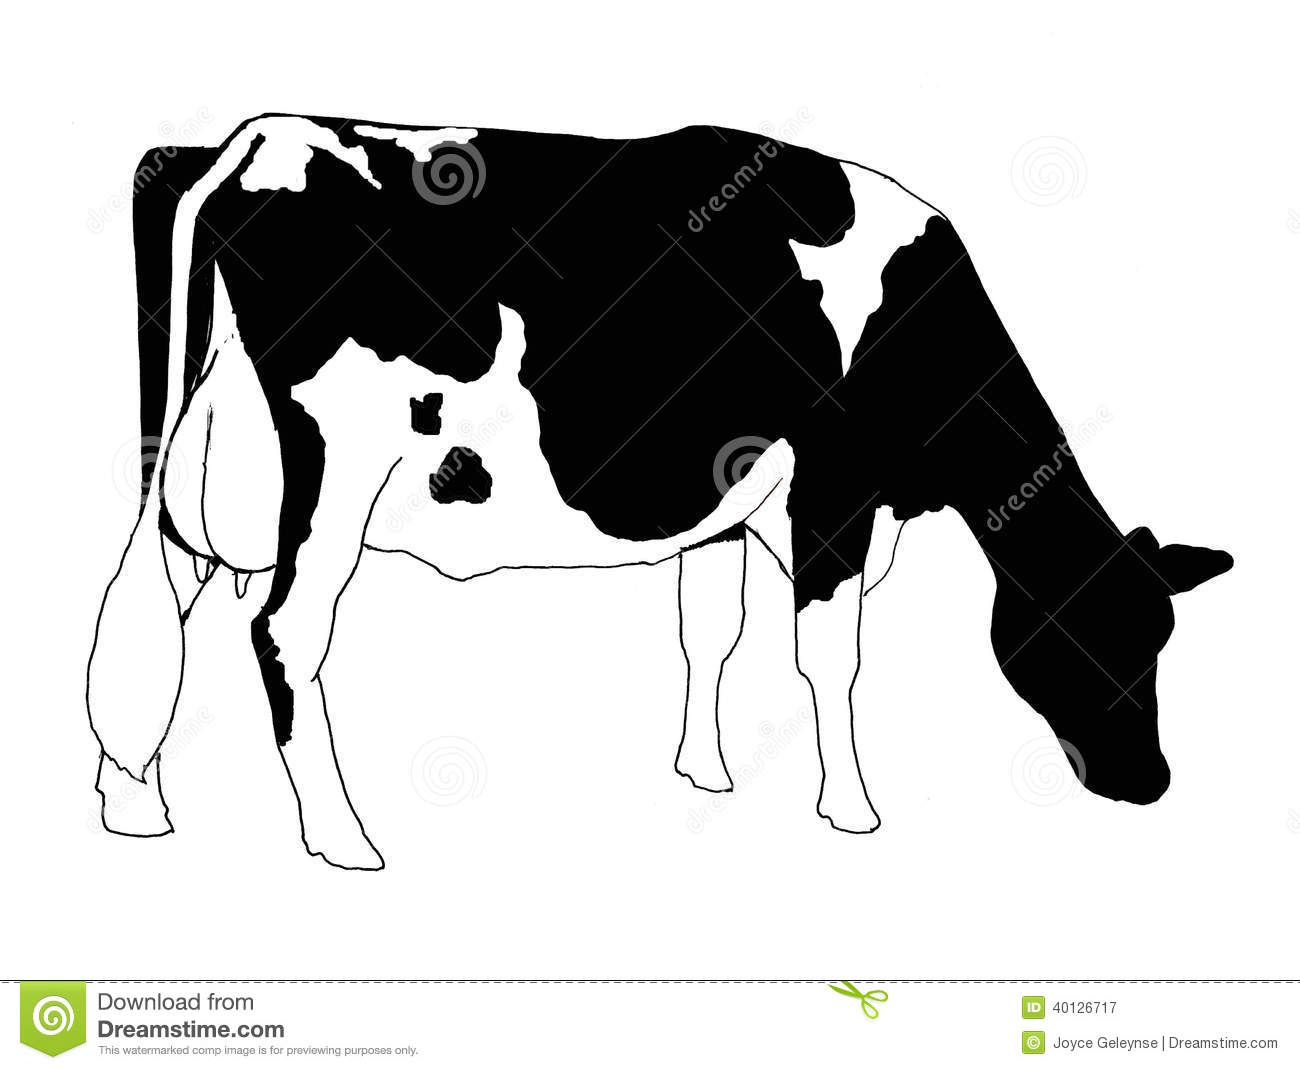 Freehand Clip Art Of Holstein Cow Stock Illustration   Image  40126717